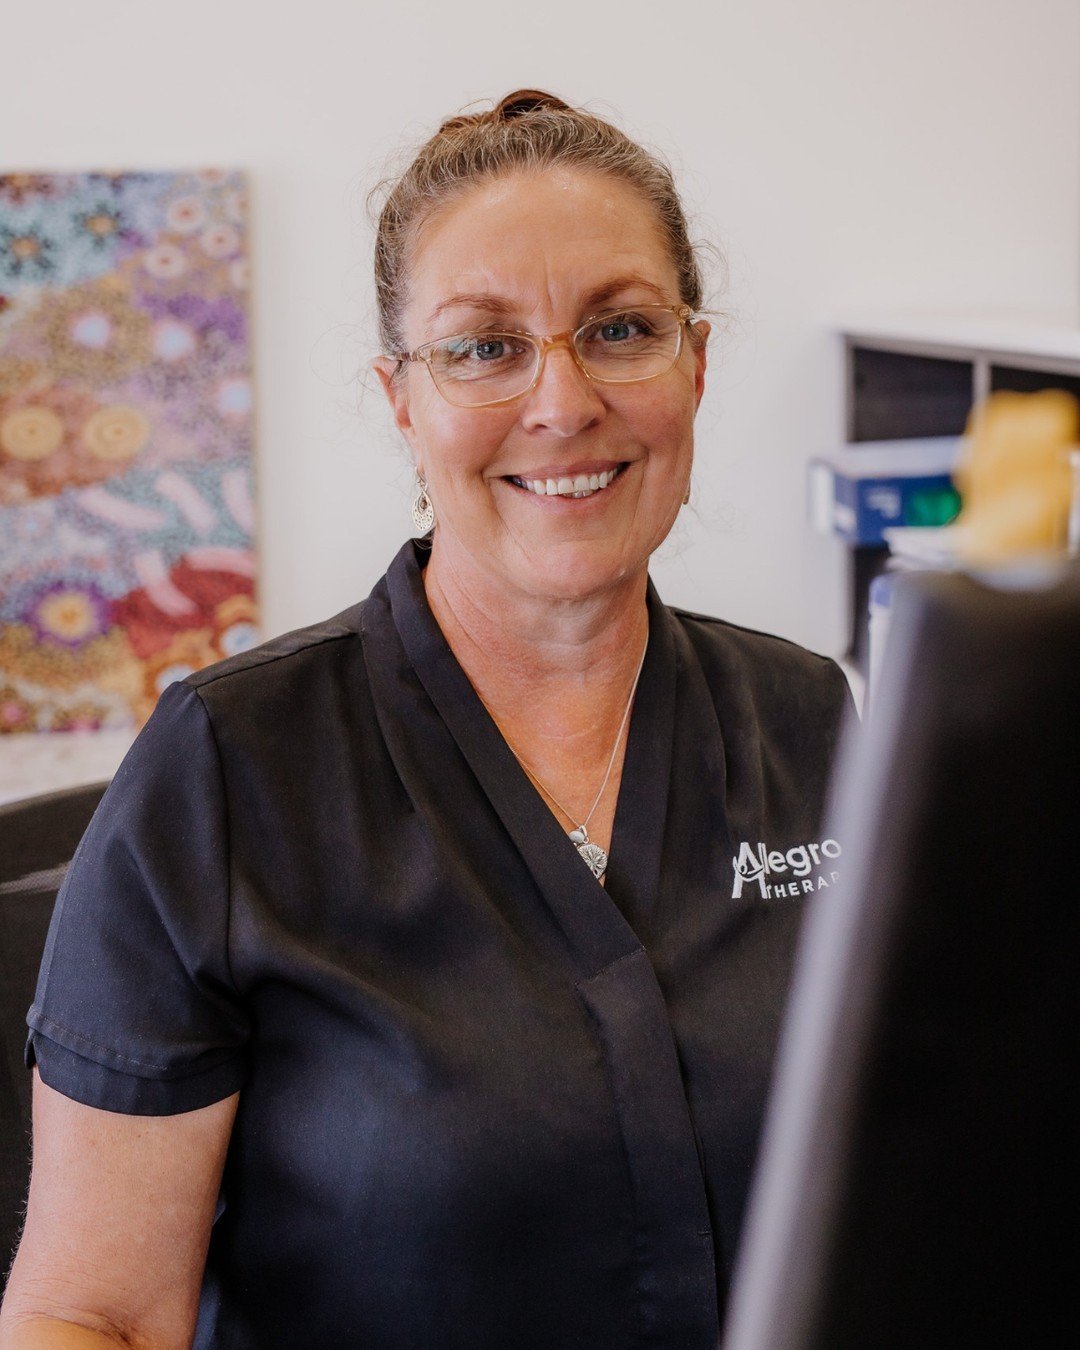 Congrats to our awesome admin, Sharlene, who is celebrating SEVEN years with us at Allegro today! 🥳 Thanks for everything you do ❤️